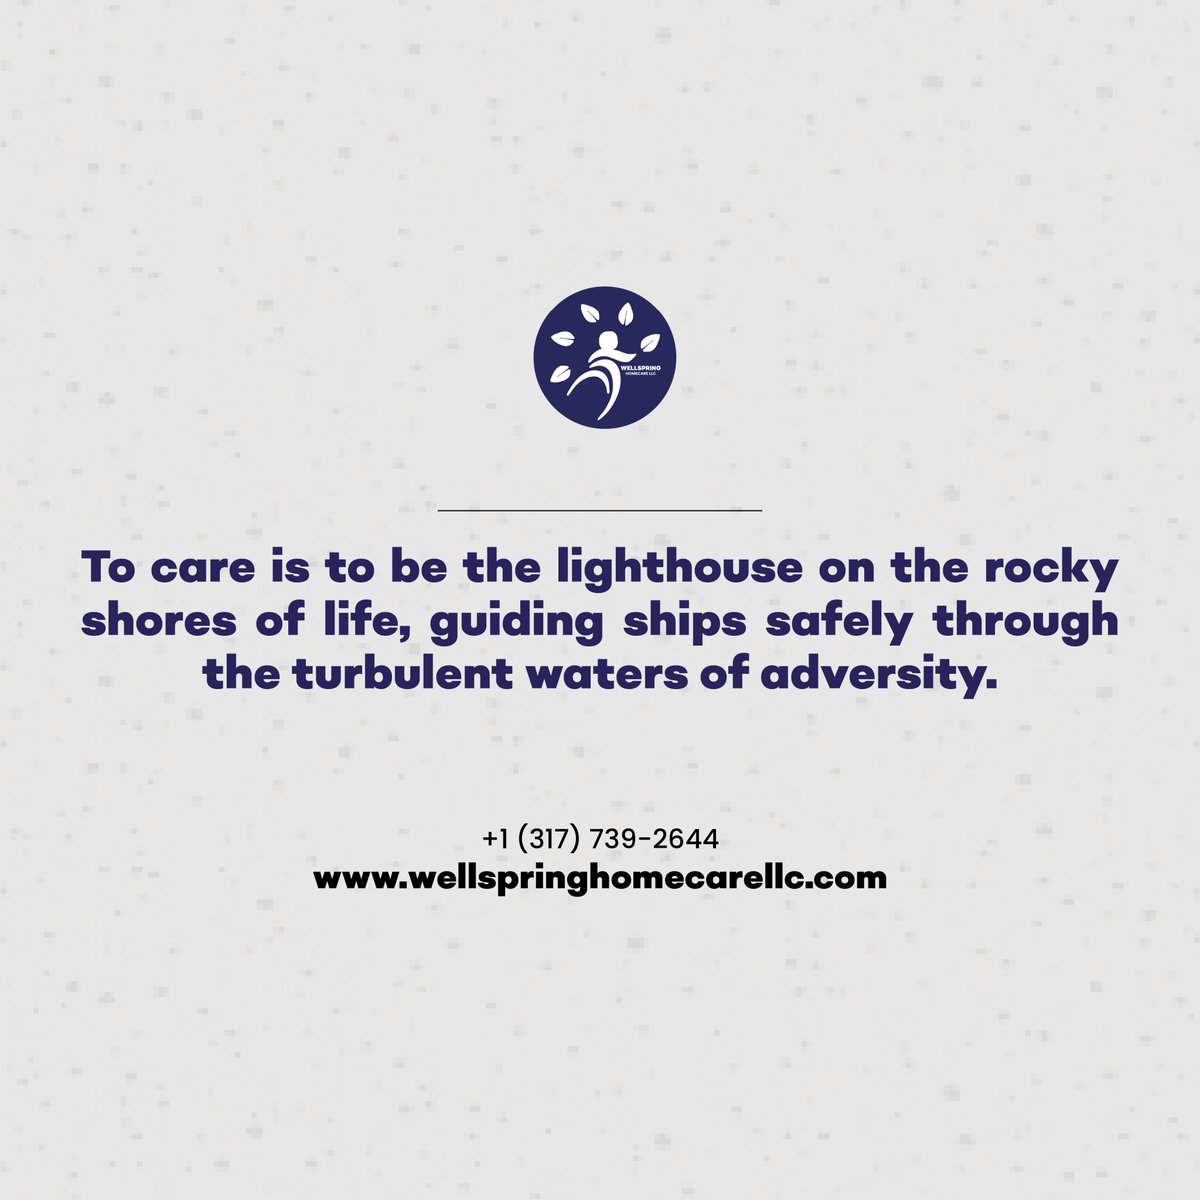 At Wellspring Homecare, we embody the spirit of being a lighthouse, guiding you and your loved ones through life's challenges with compassion and expertise.
#CaringWithCompassion #WellnessThroughCare #GuidingThroughAdversity #EmpathyInCaregiving #SupportingLovedOnes